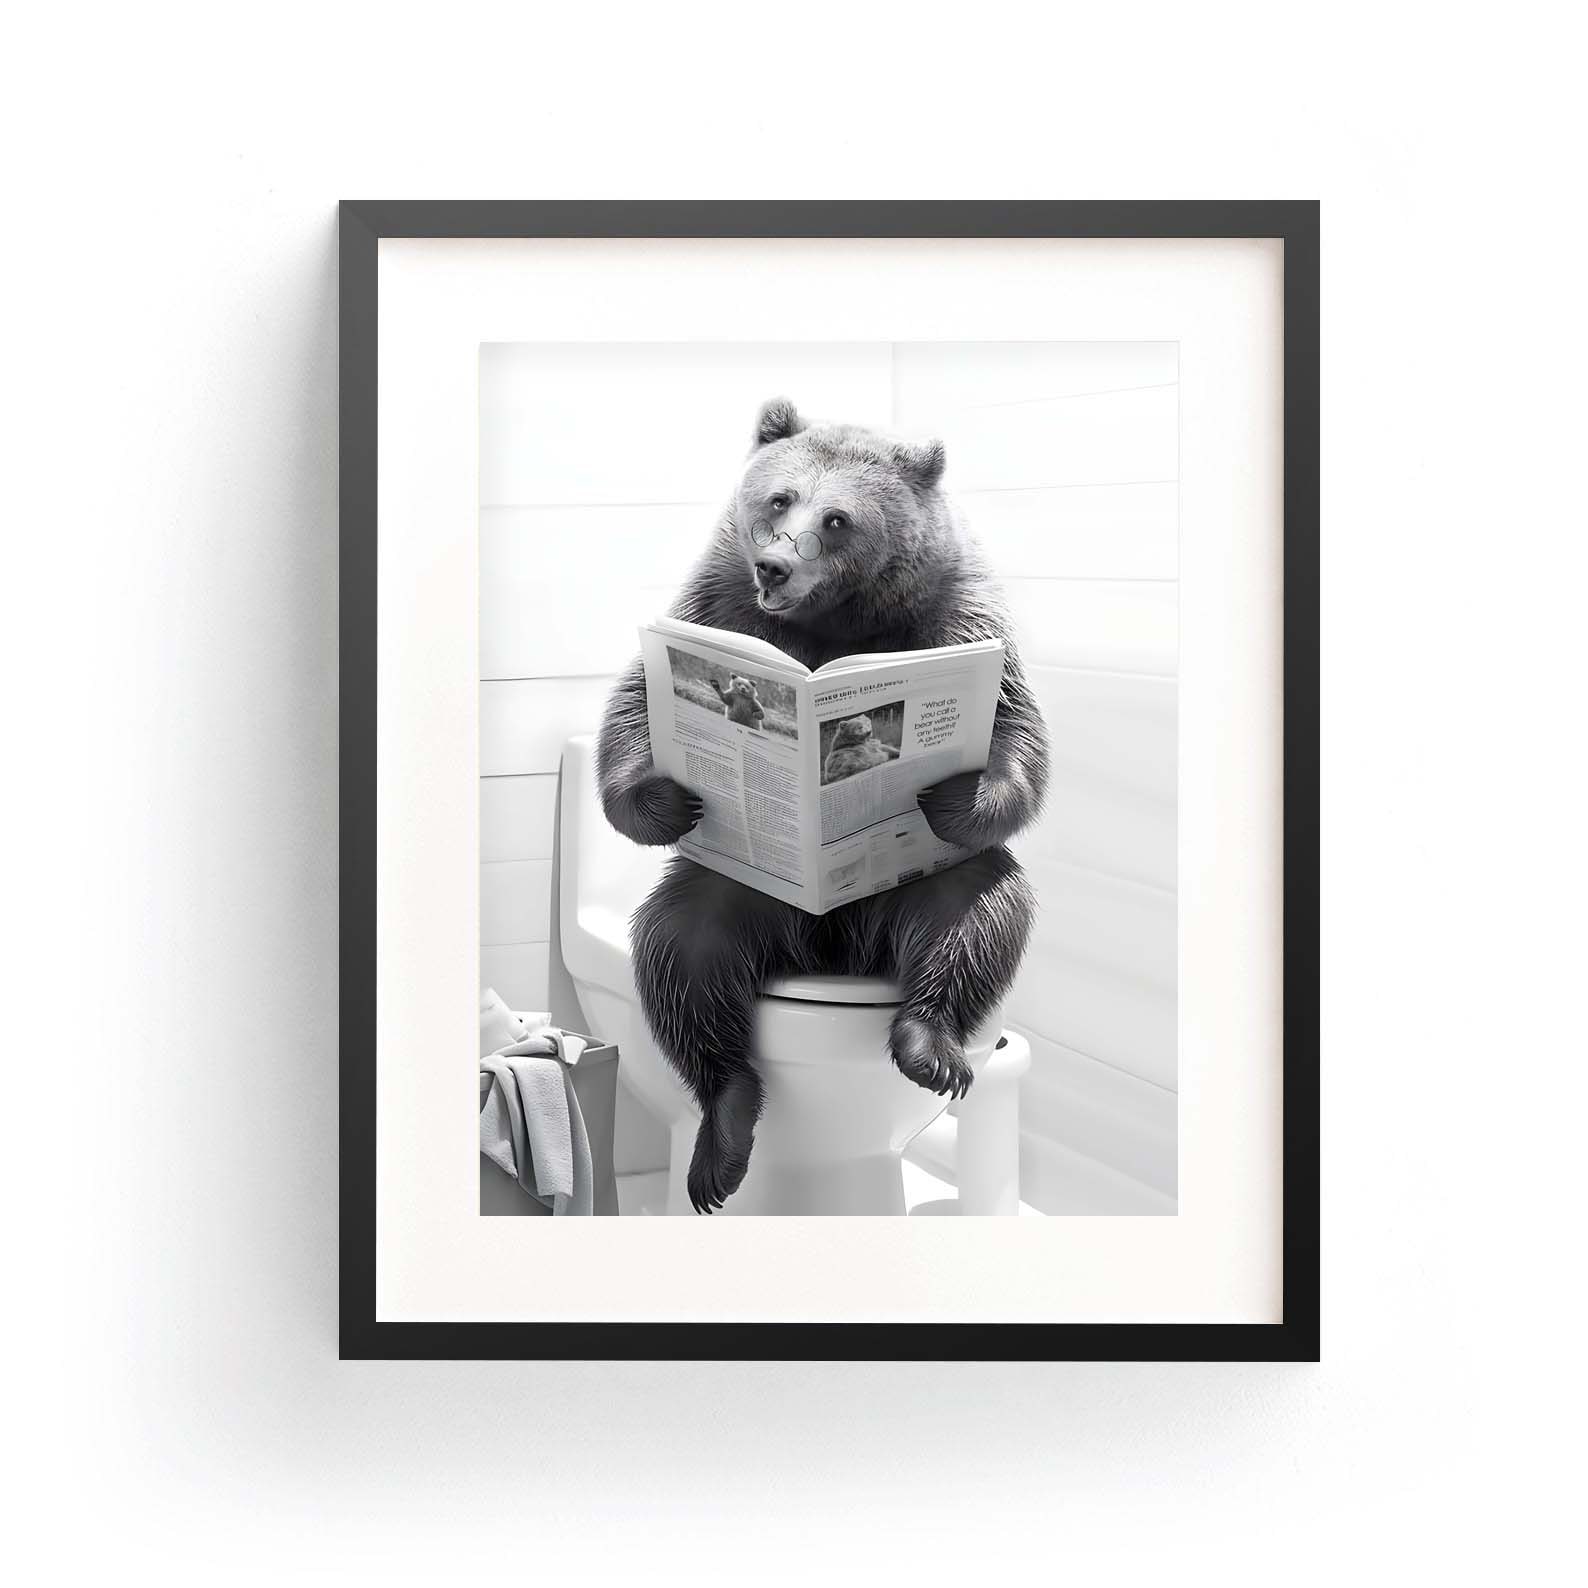 Graffiti Wall Art Colorful Bear Picture Fluid Violent Bear Posters